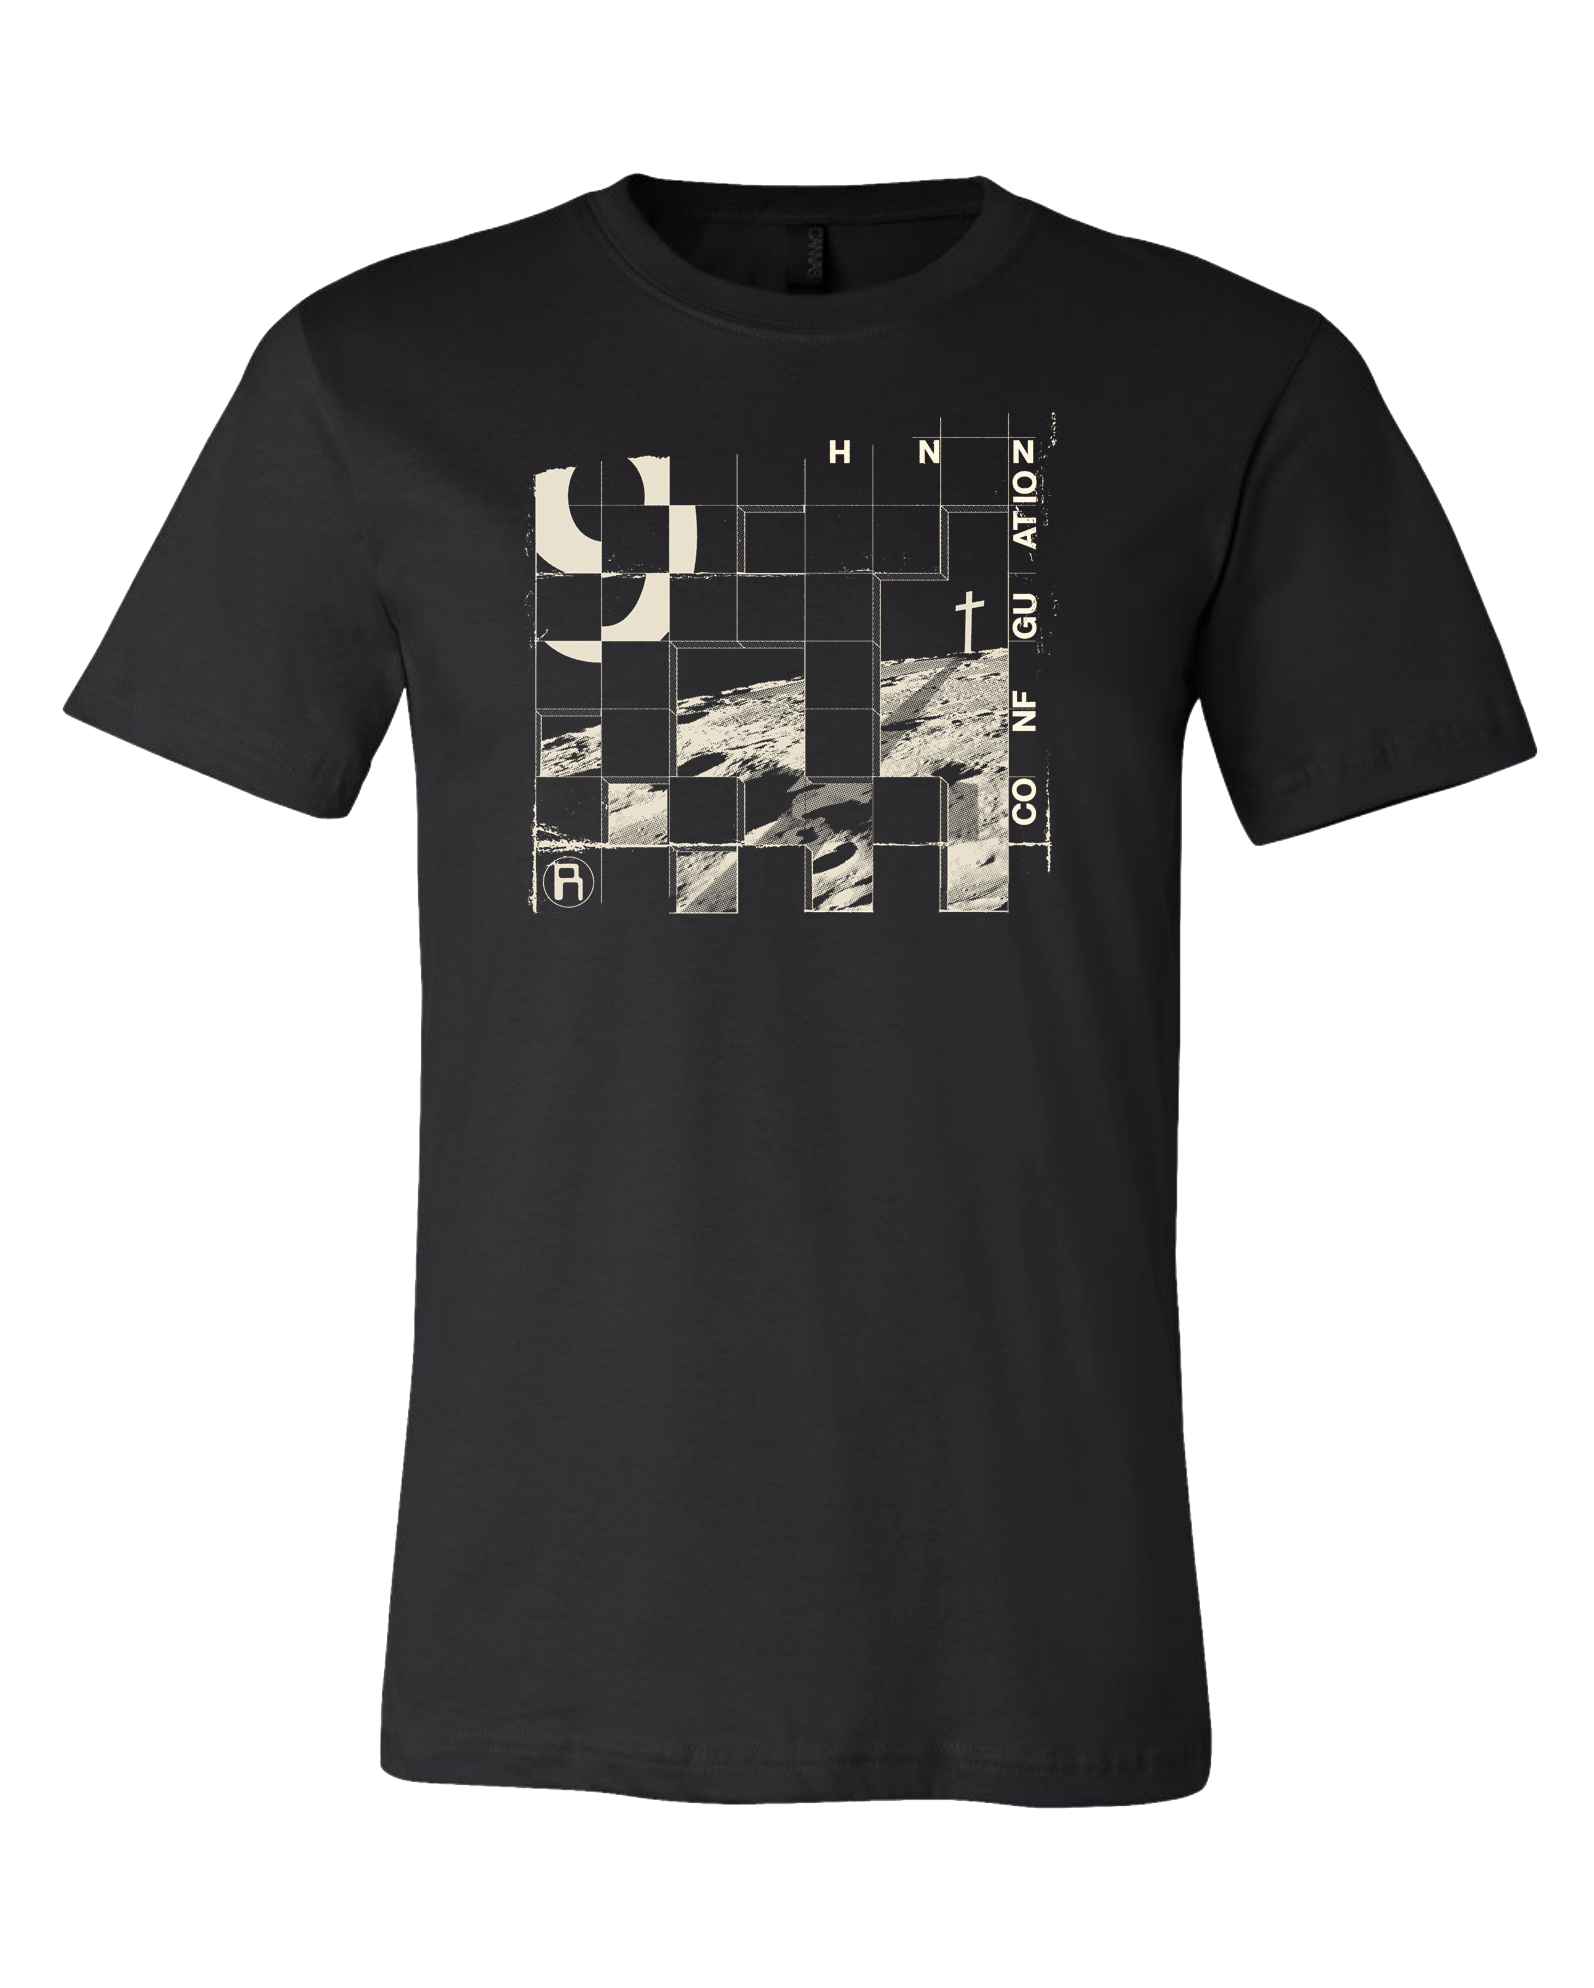 The Rentals 9TH CONFIGURATION Tee